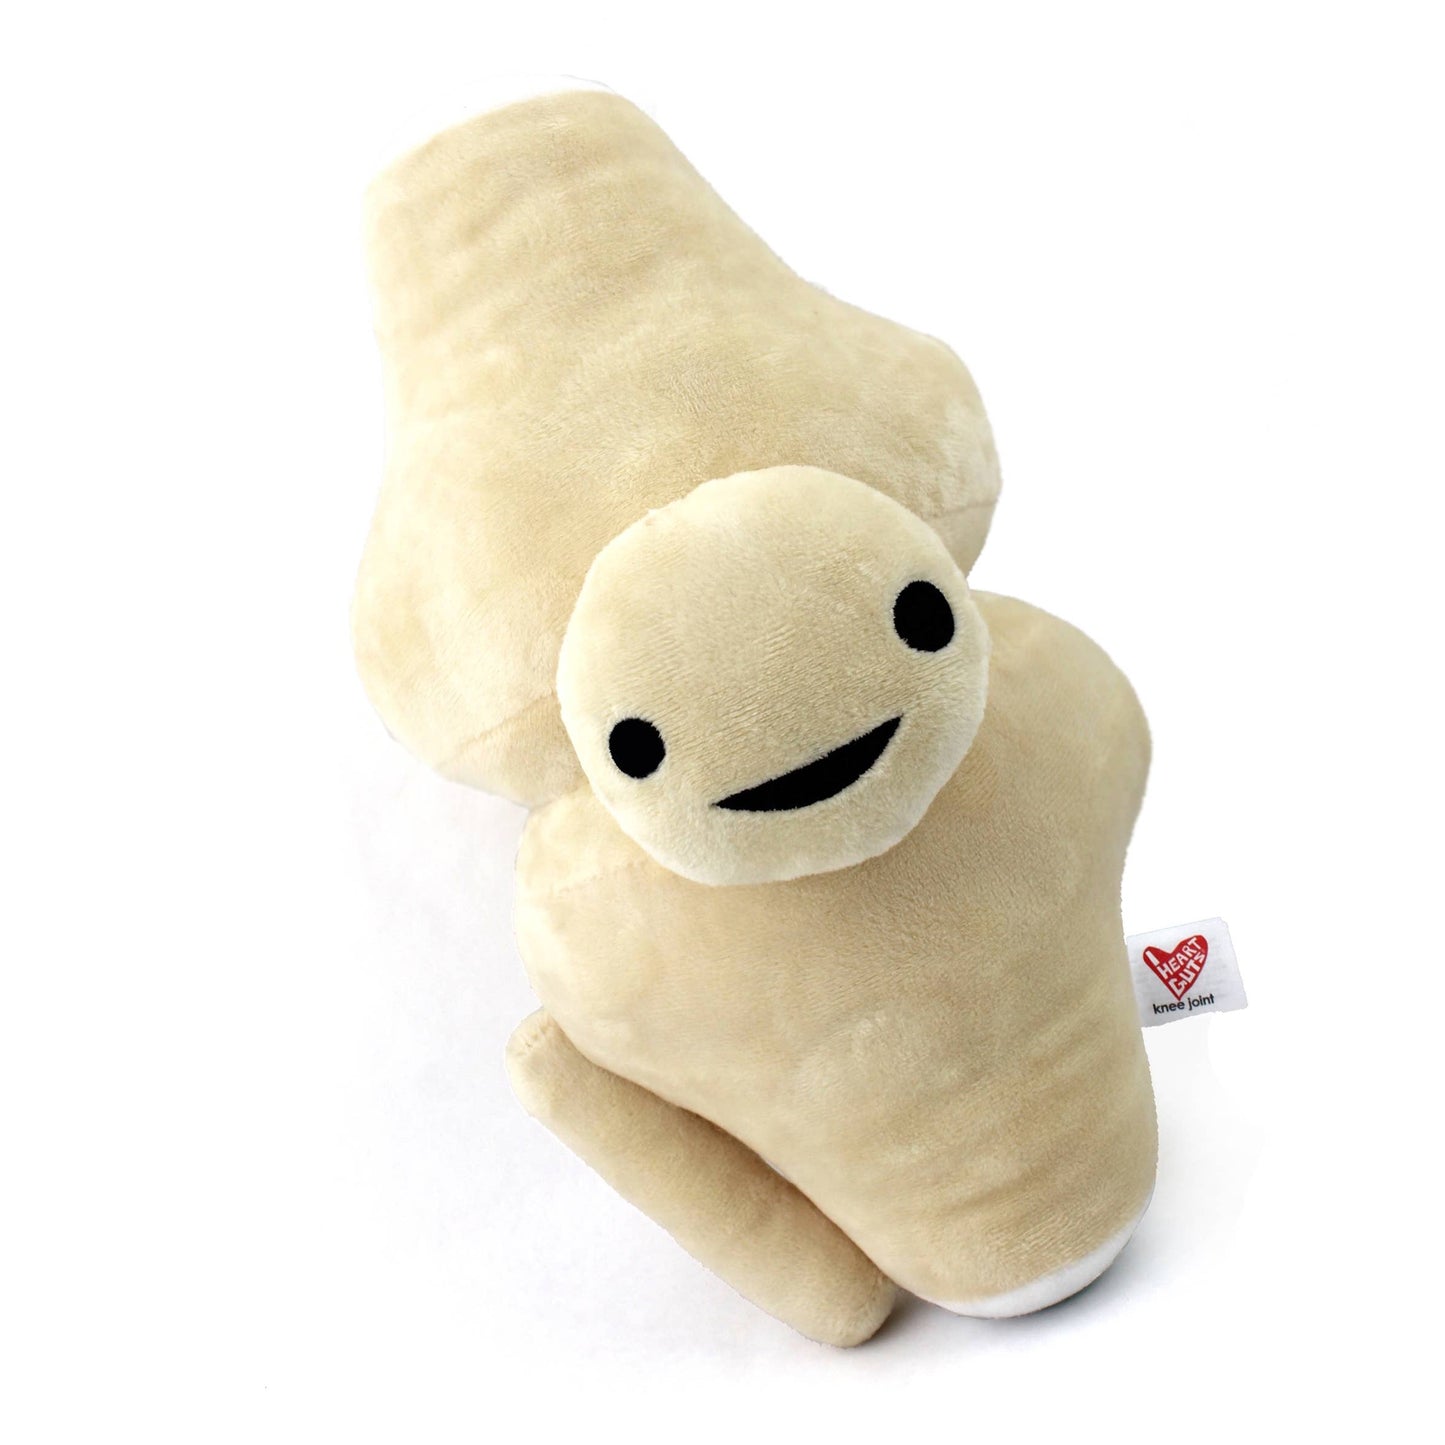 Knee Joint Plush - Kneed For Speed